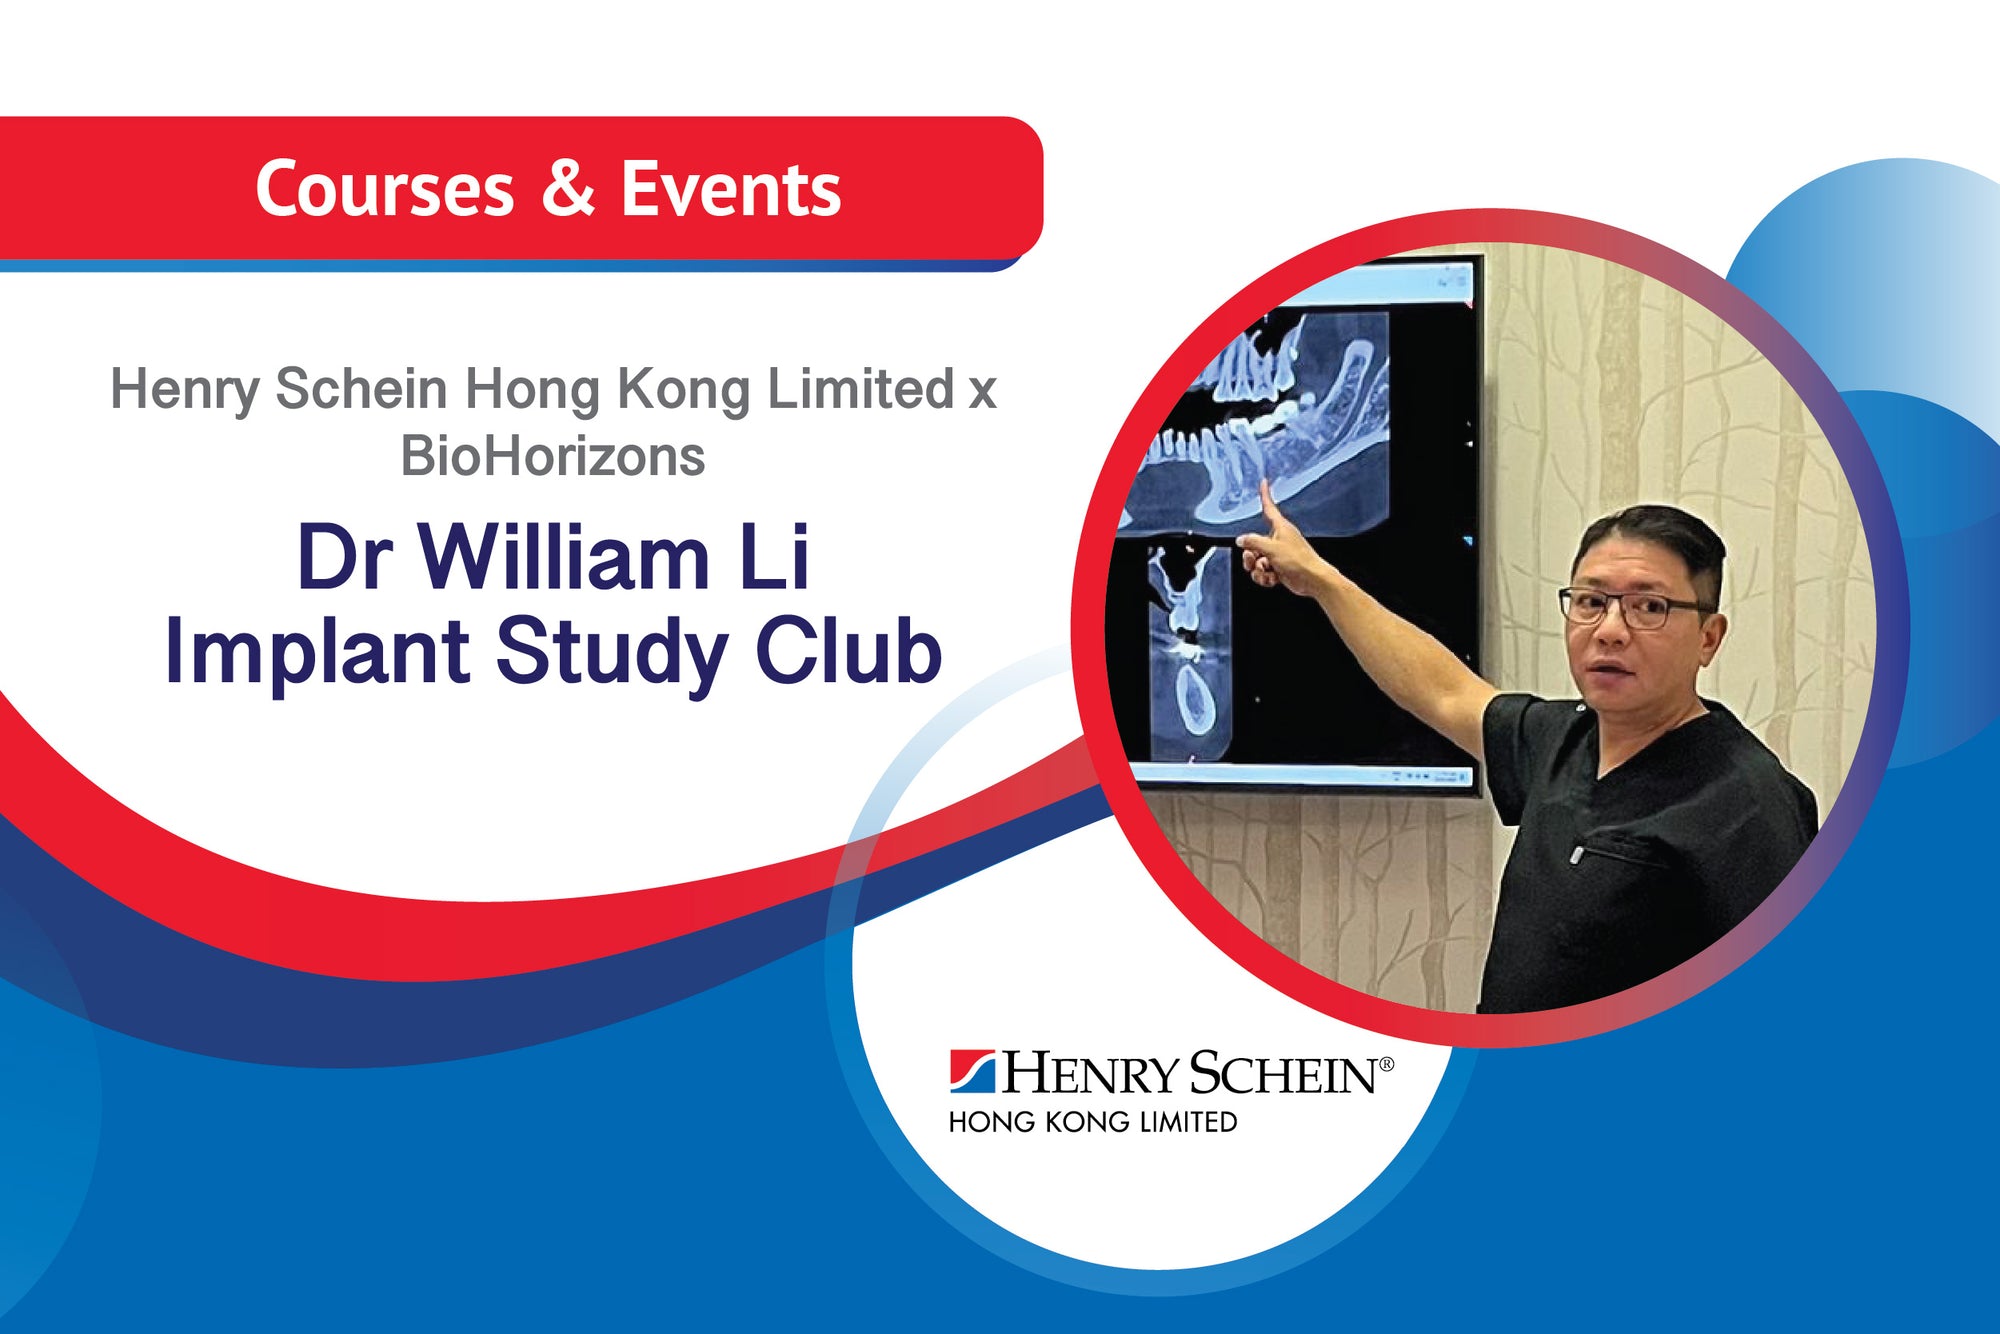 Henry Schein Hong Kong Limited & BioHorizons Successfully Hosts the Implant Study Club